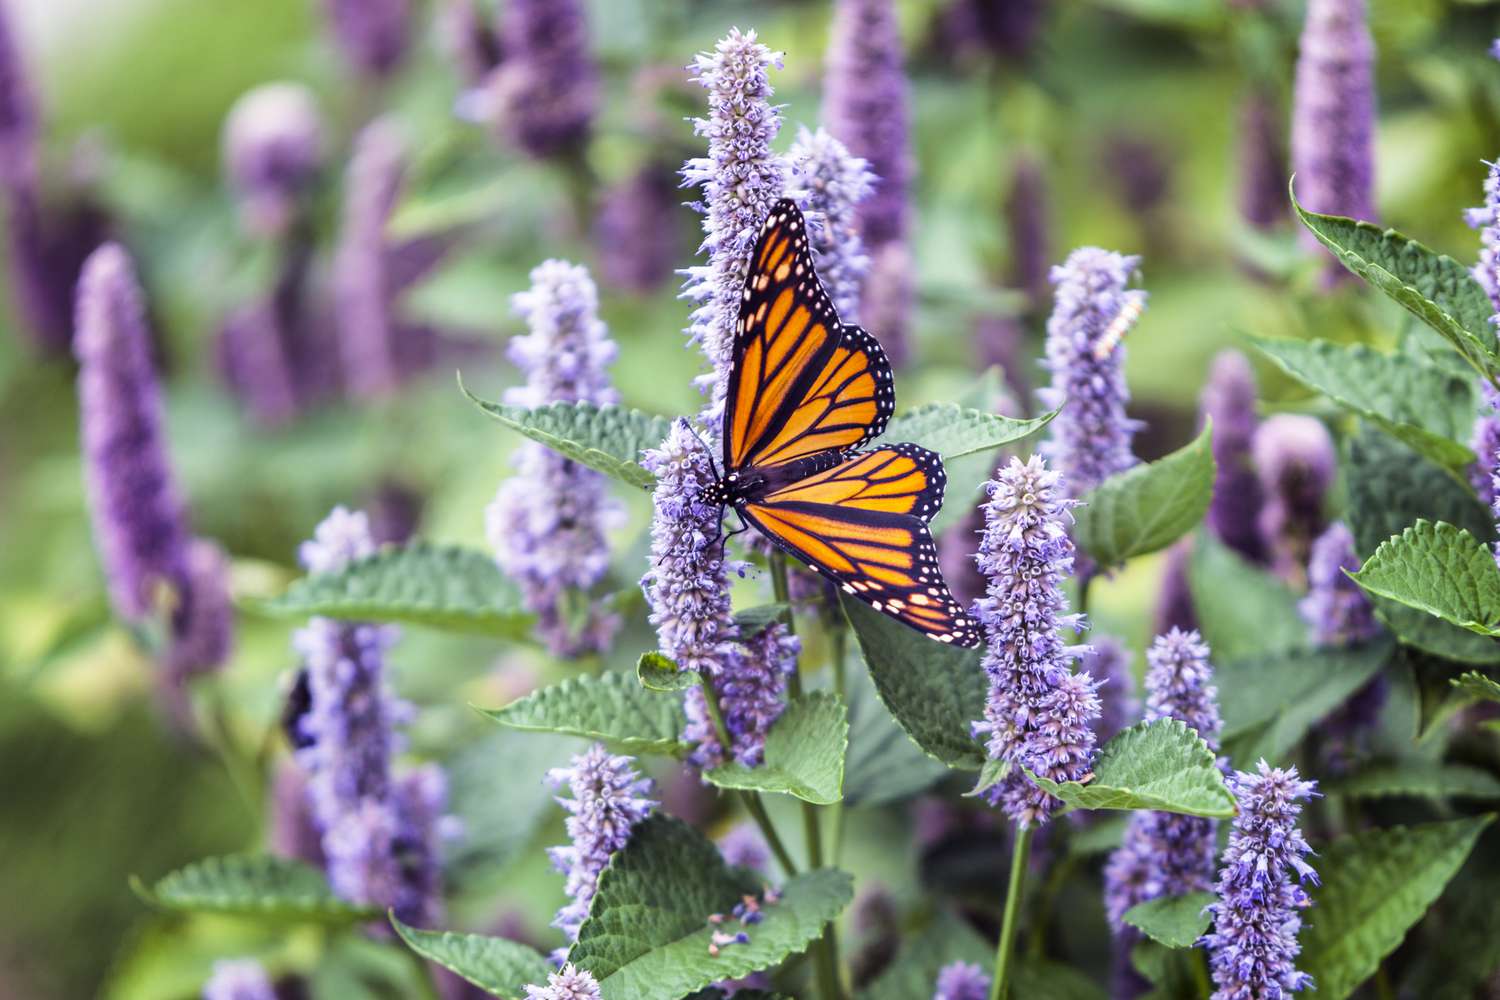 long purple anise hyssop flowers with green leaves in garden, a black and orange monarch butterfly is on one of the flowers